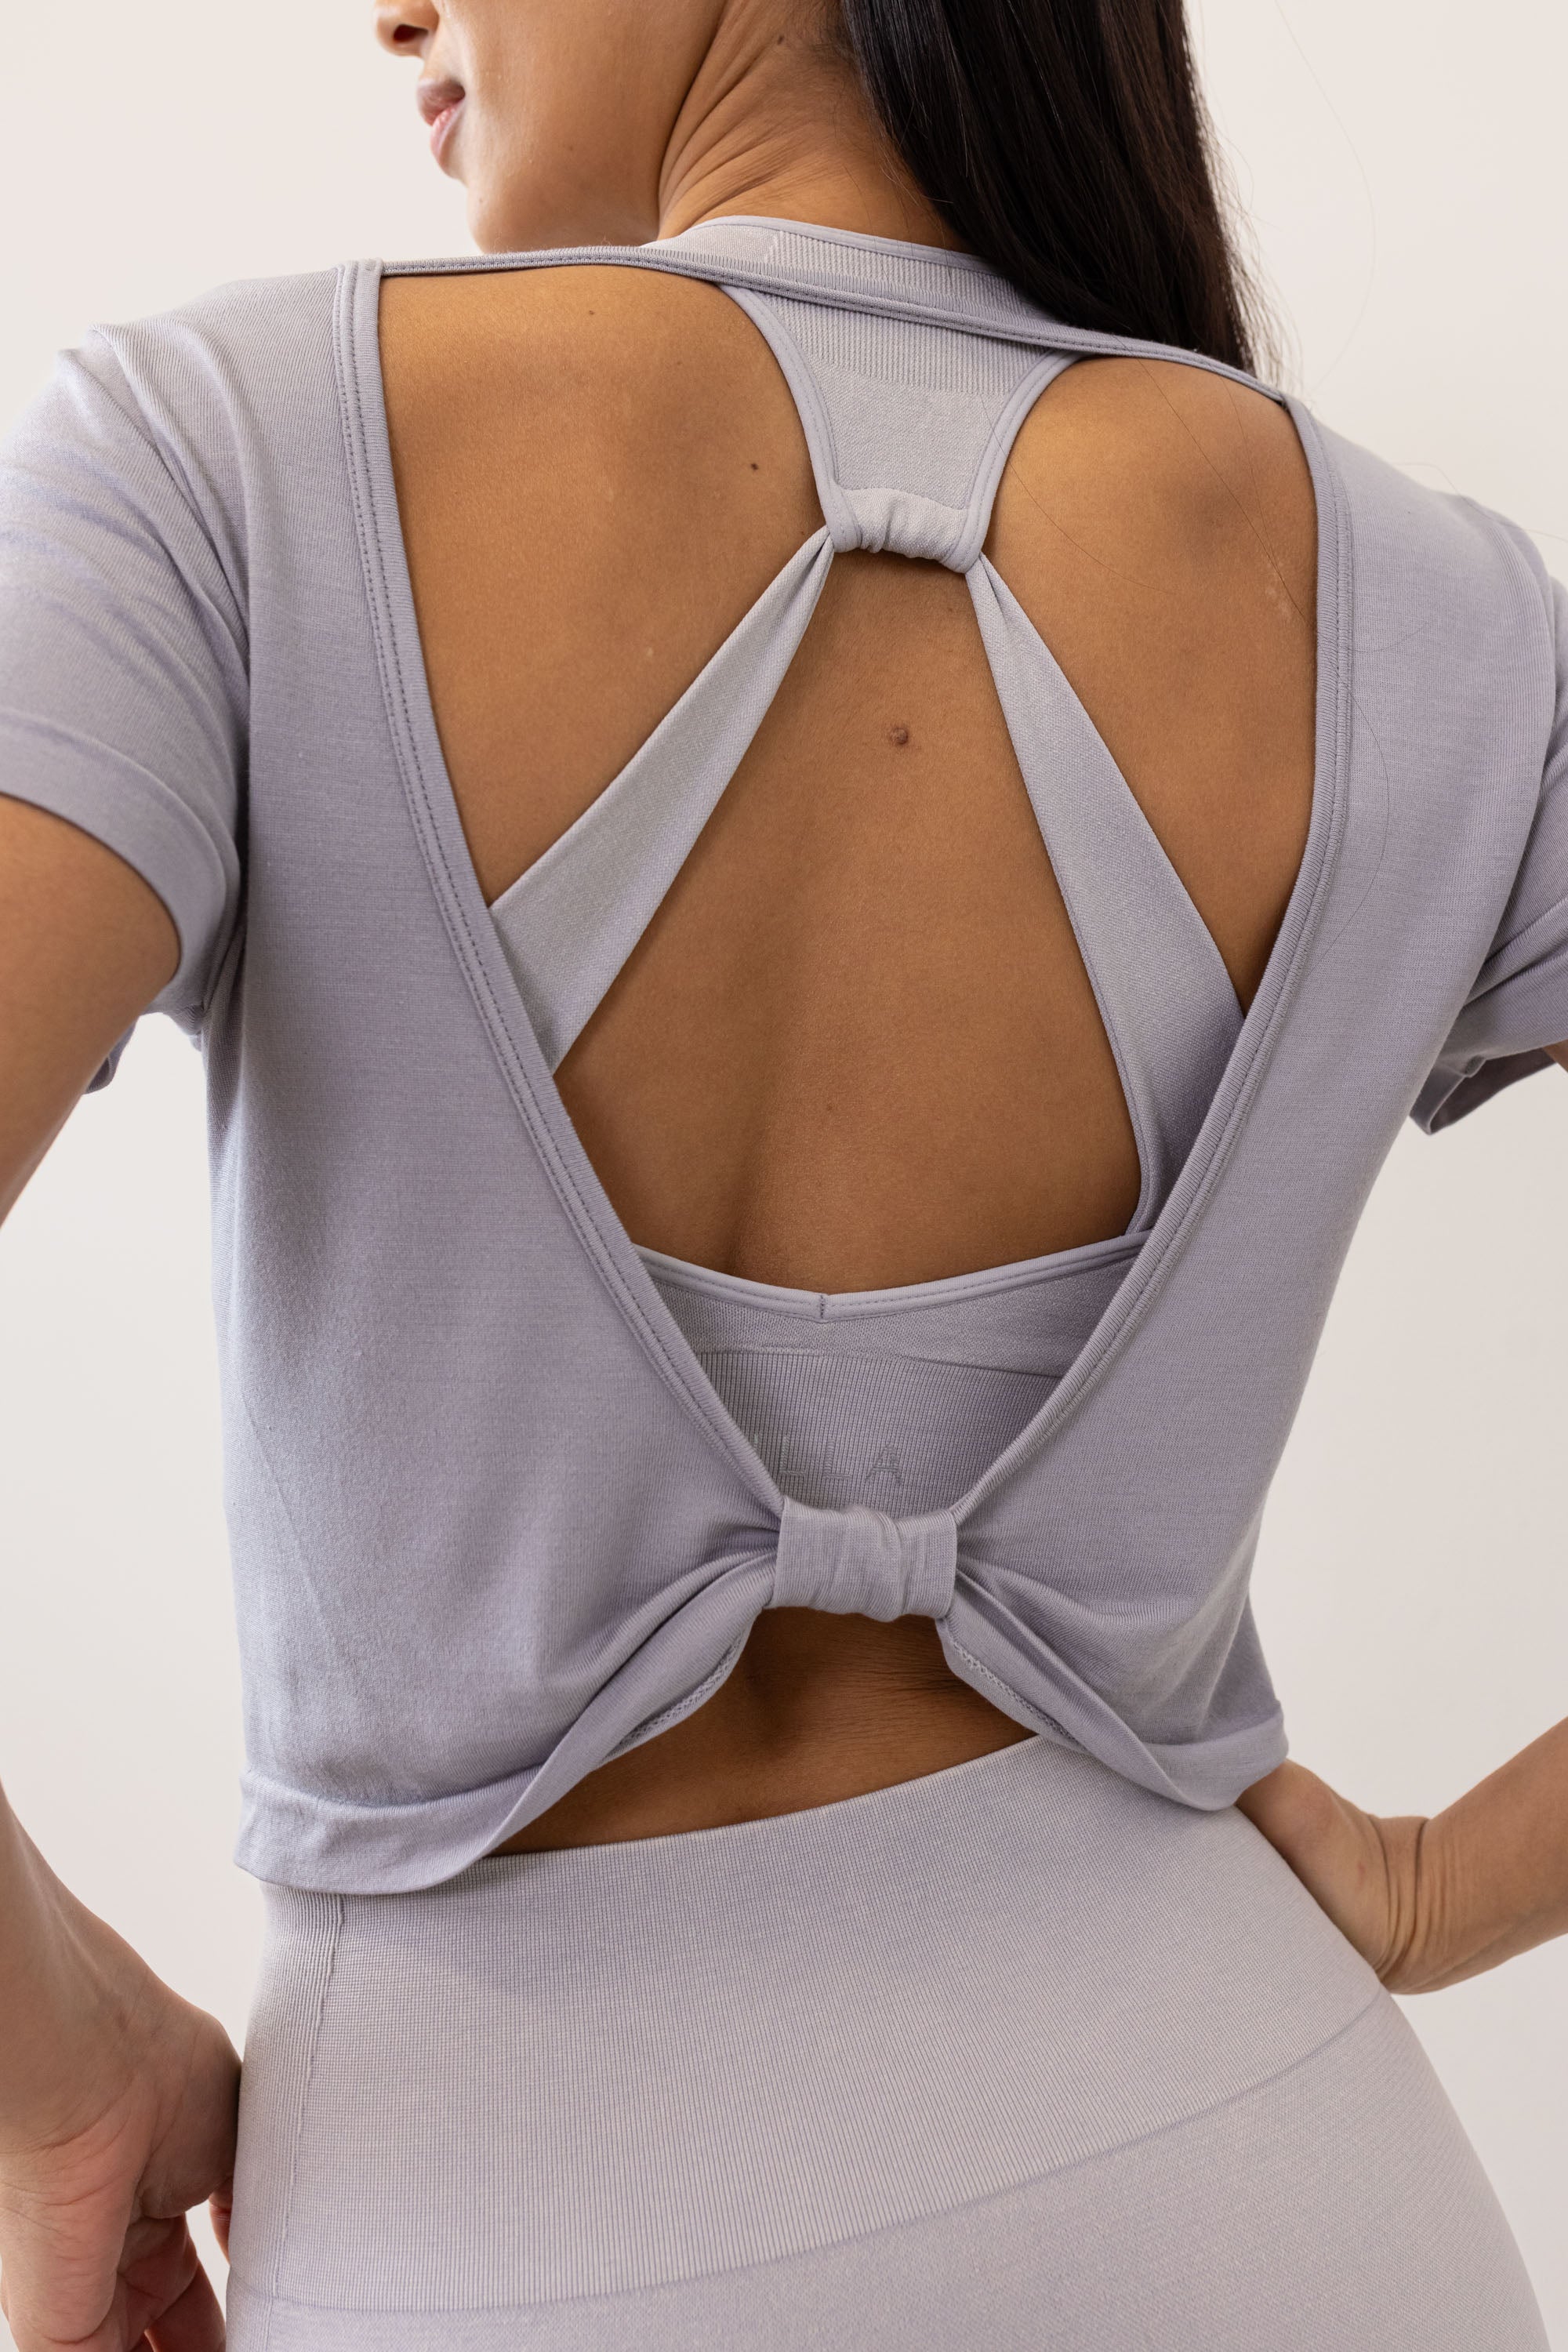 Meet our light grey Frances Modal Tee - your go-to for yoga or any workout! With a cropped length and low back, it's perfect for layering over leggings and a sports bra. Crafted from gentle Lenzing modal fabric blended with recycled polyamide, it offers unmatched softness and comfort. Cut to meet your leggings' waistband, it's a versatile must-have for your activewear collection. Experience comfort and style with Frances Modal Tee by Jilla Active